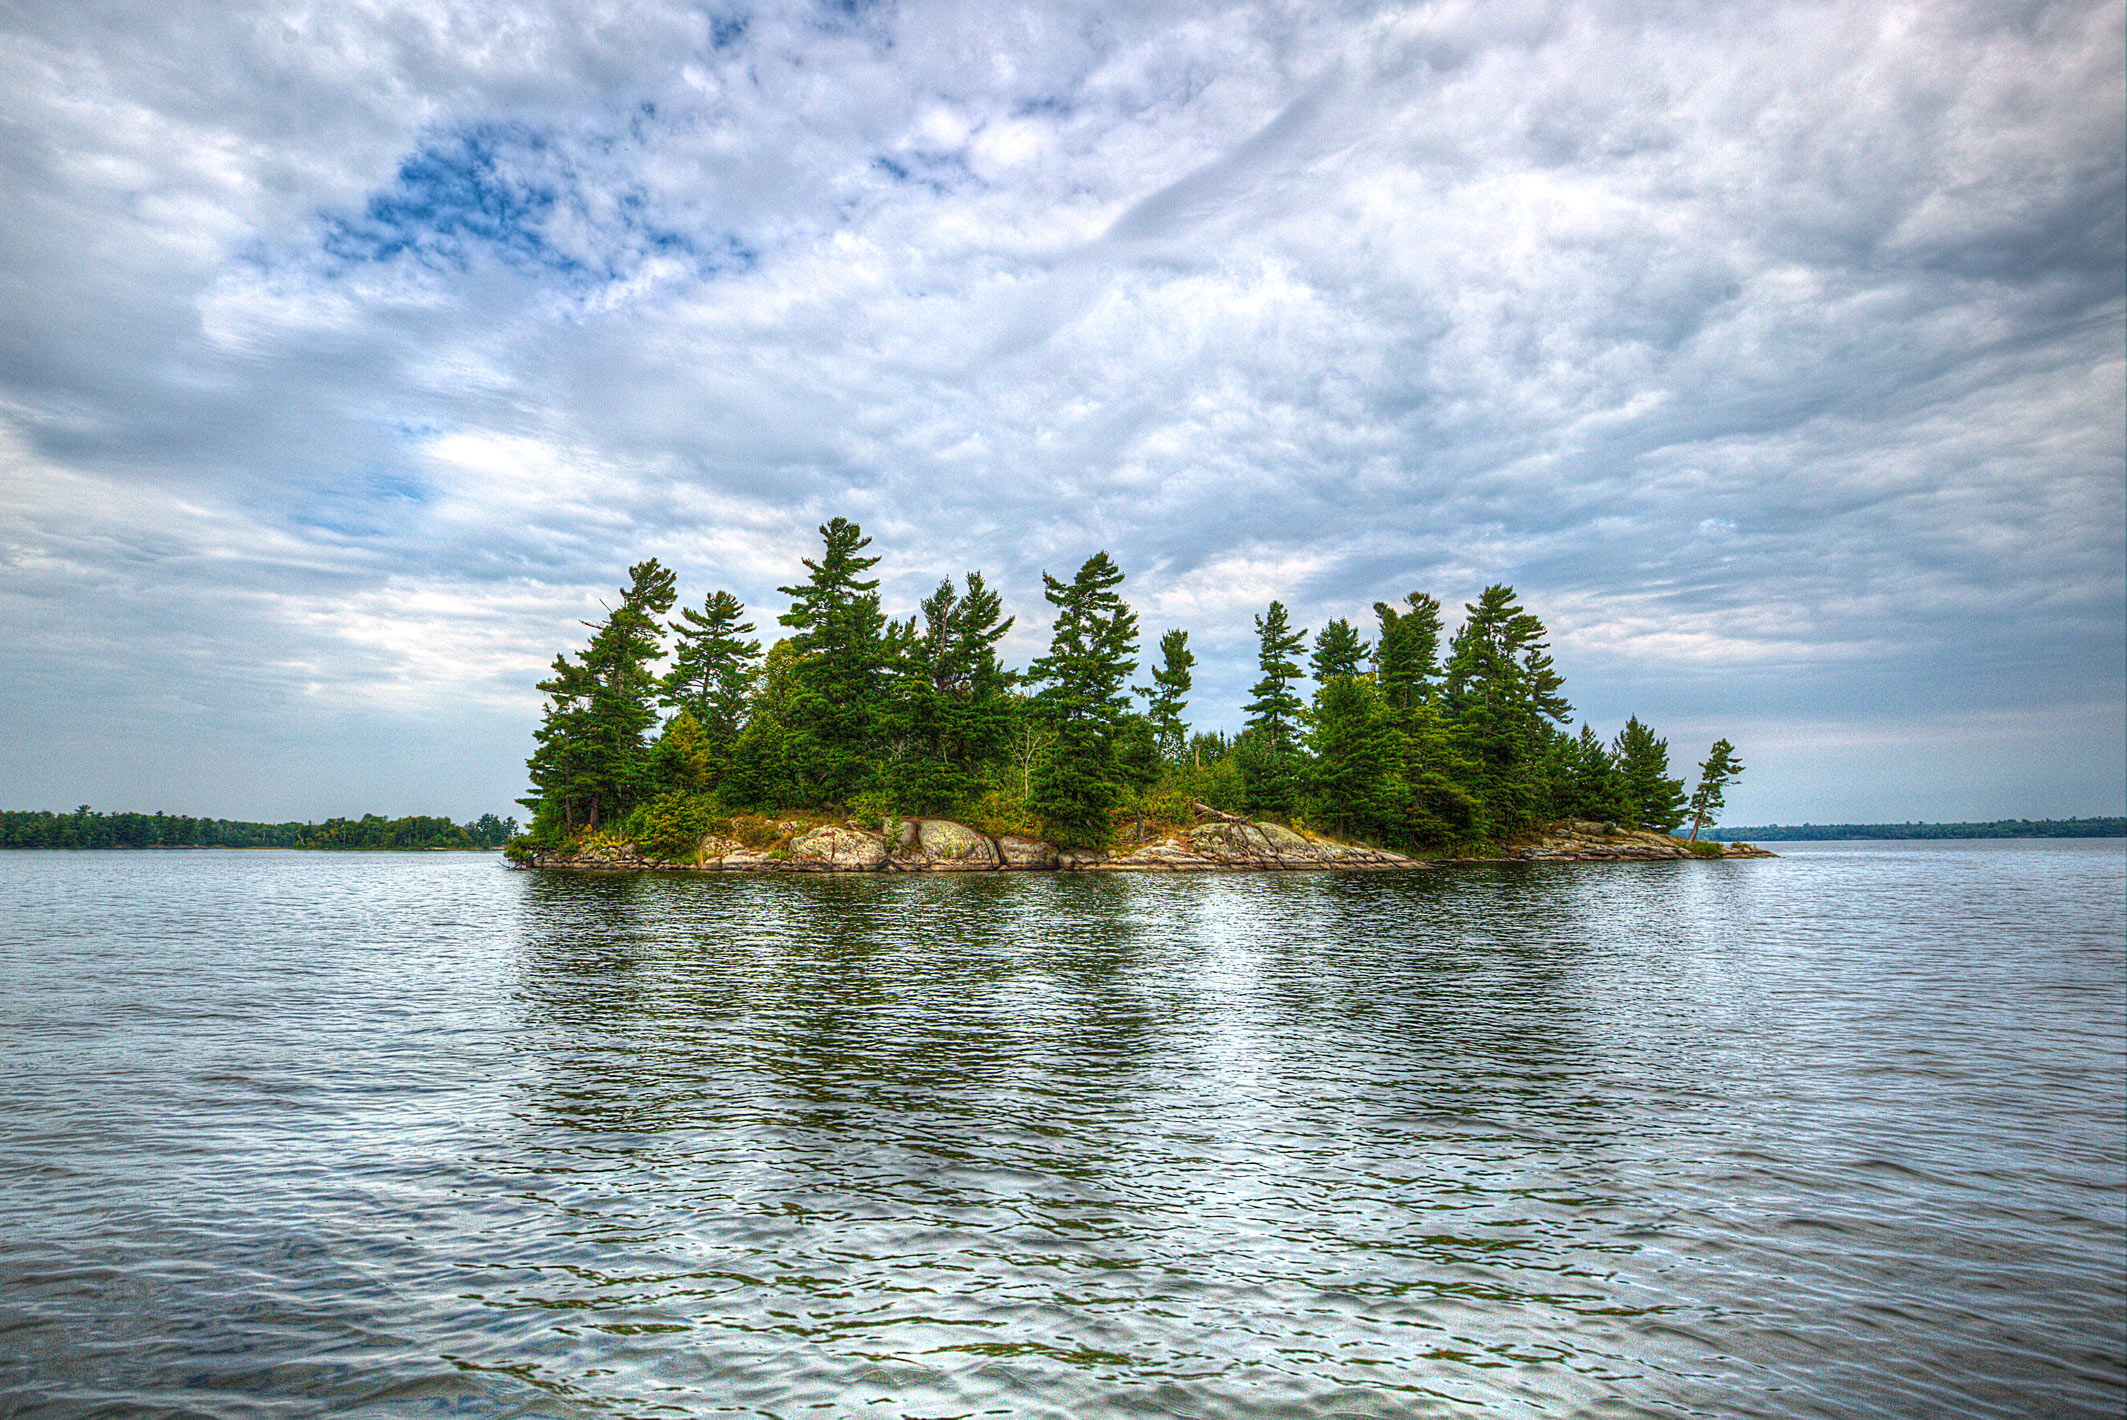 One of many islands in Voyageurs National Park